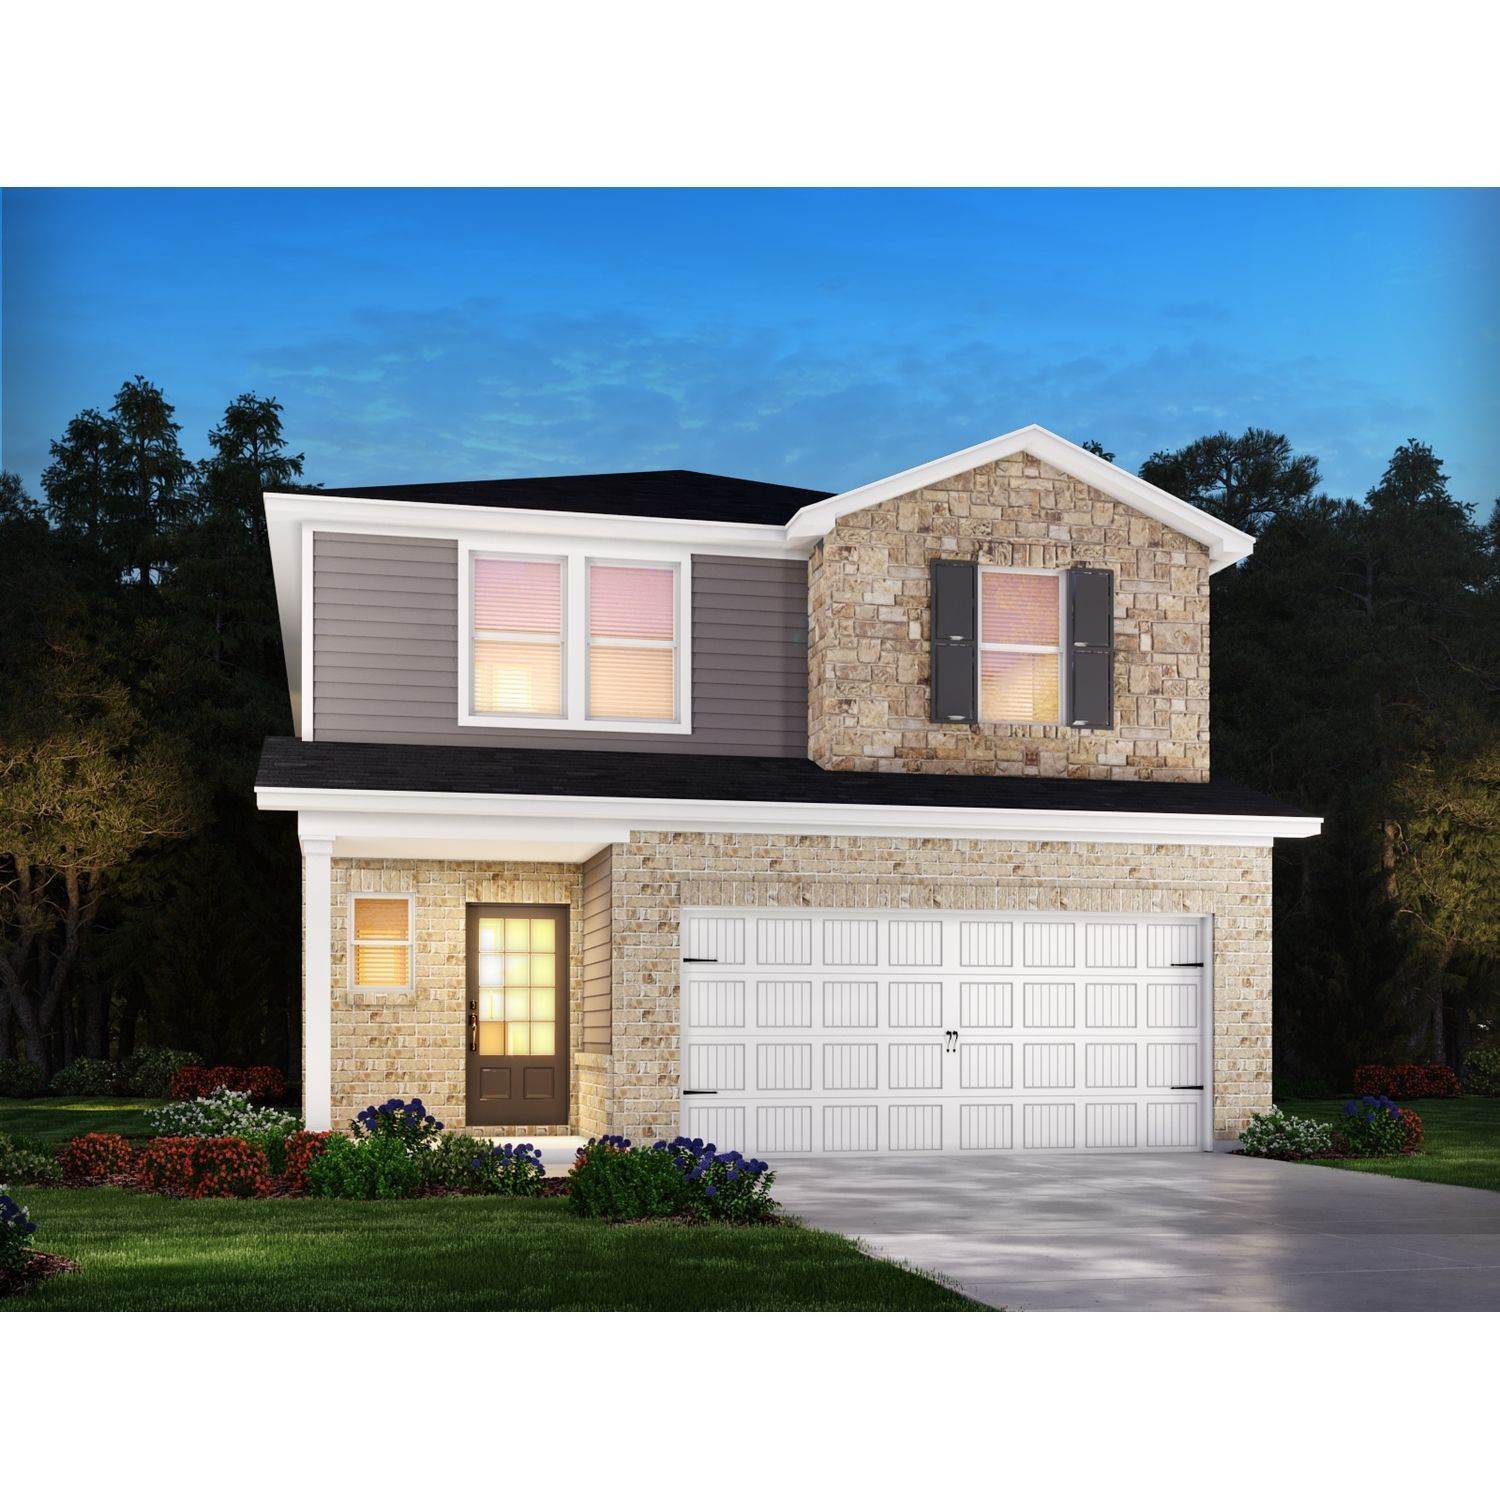 Single Family for Sale at Sweetwater Green - Royal Series Lawrenceville, GA 30044